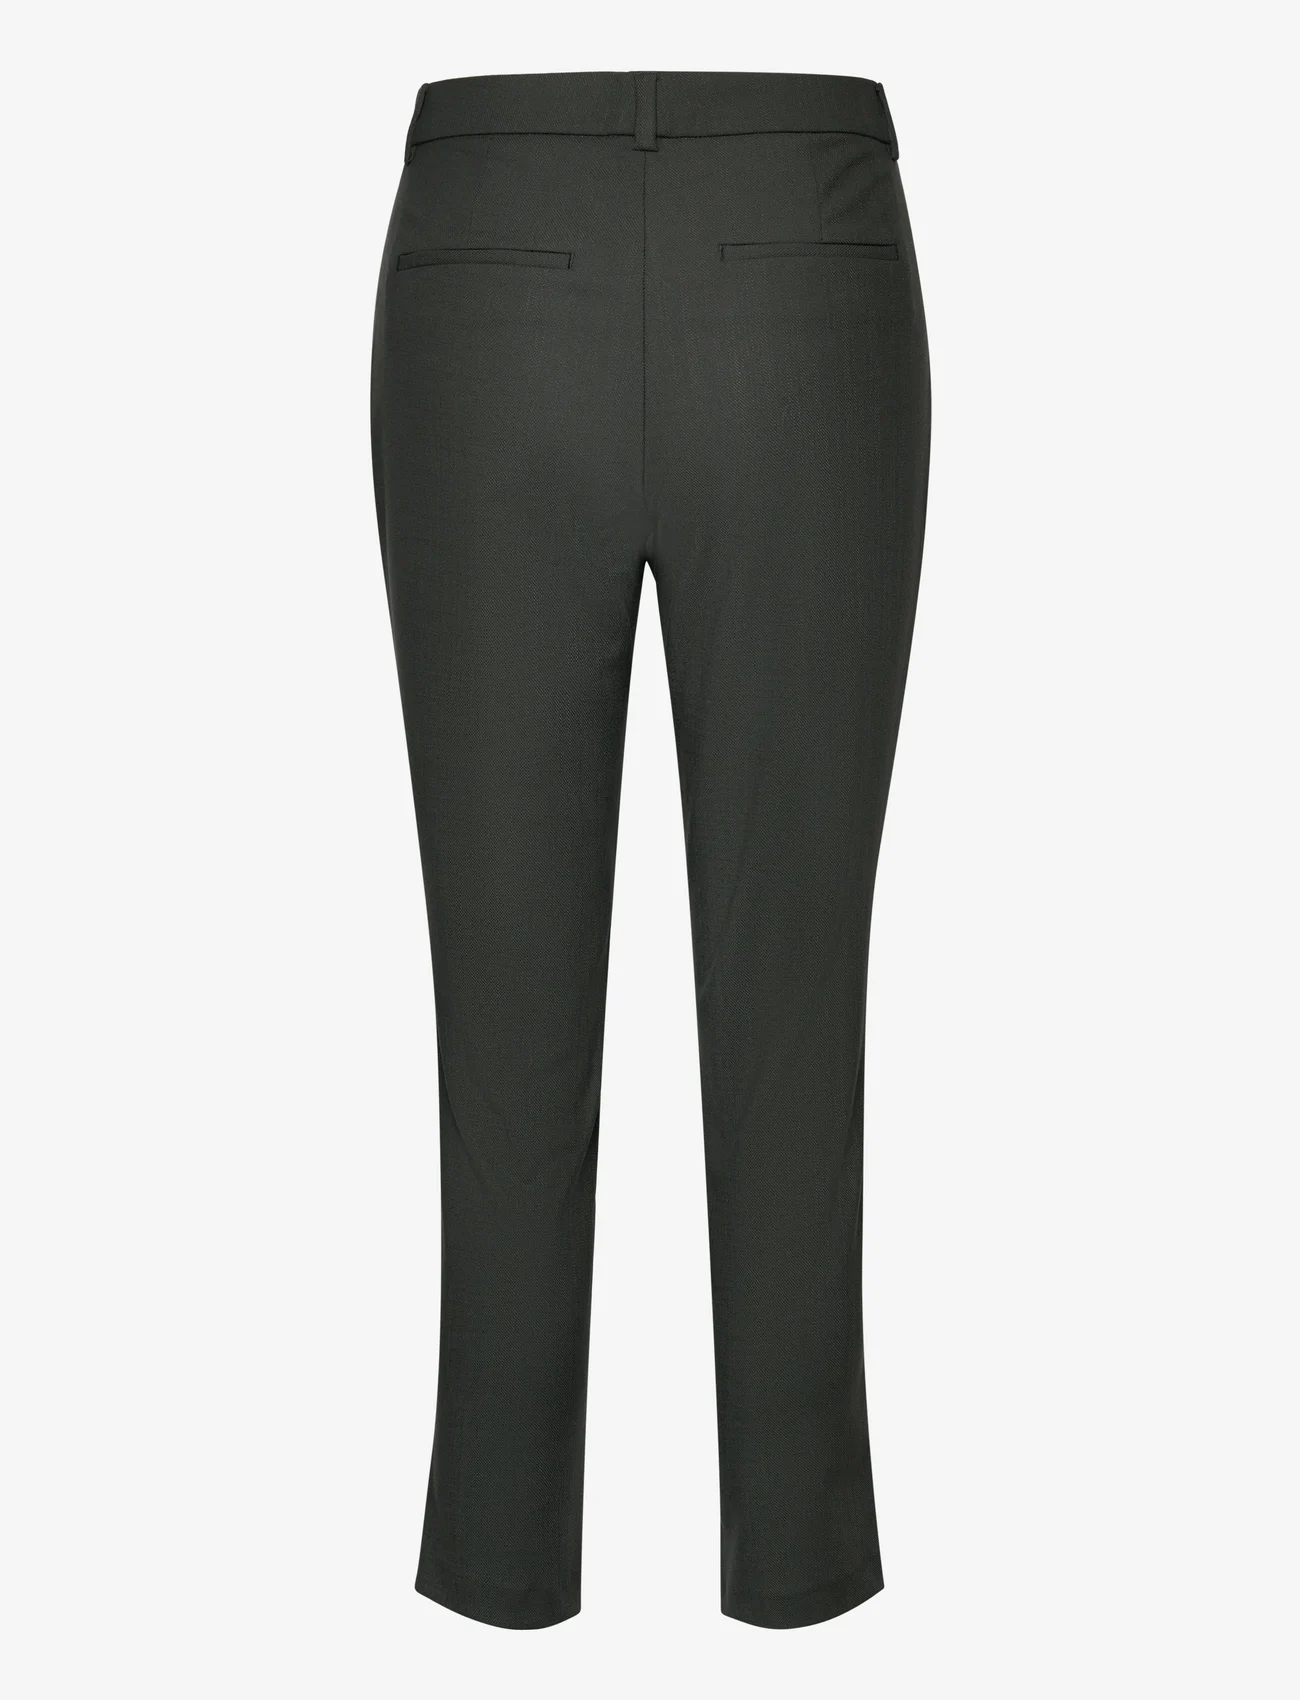 FIVEUNITS - Kylie Crop - straight leg trousers - forest green - 1